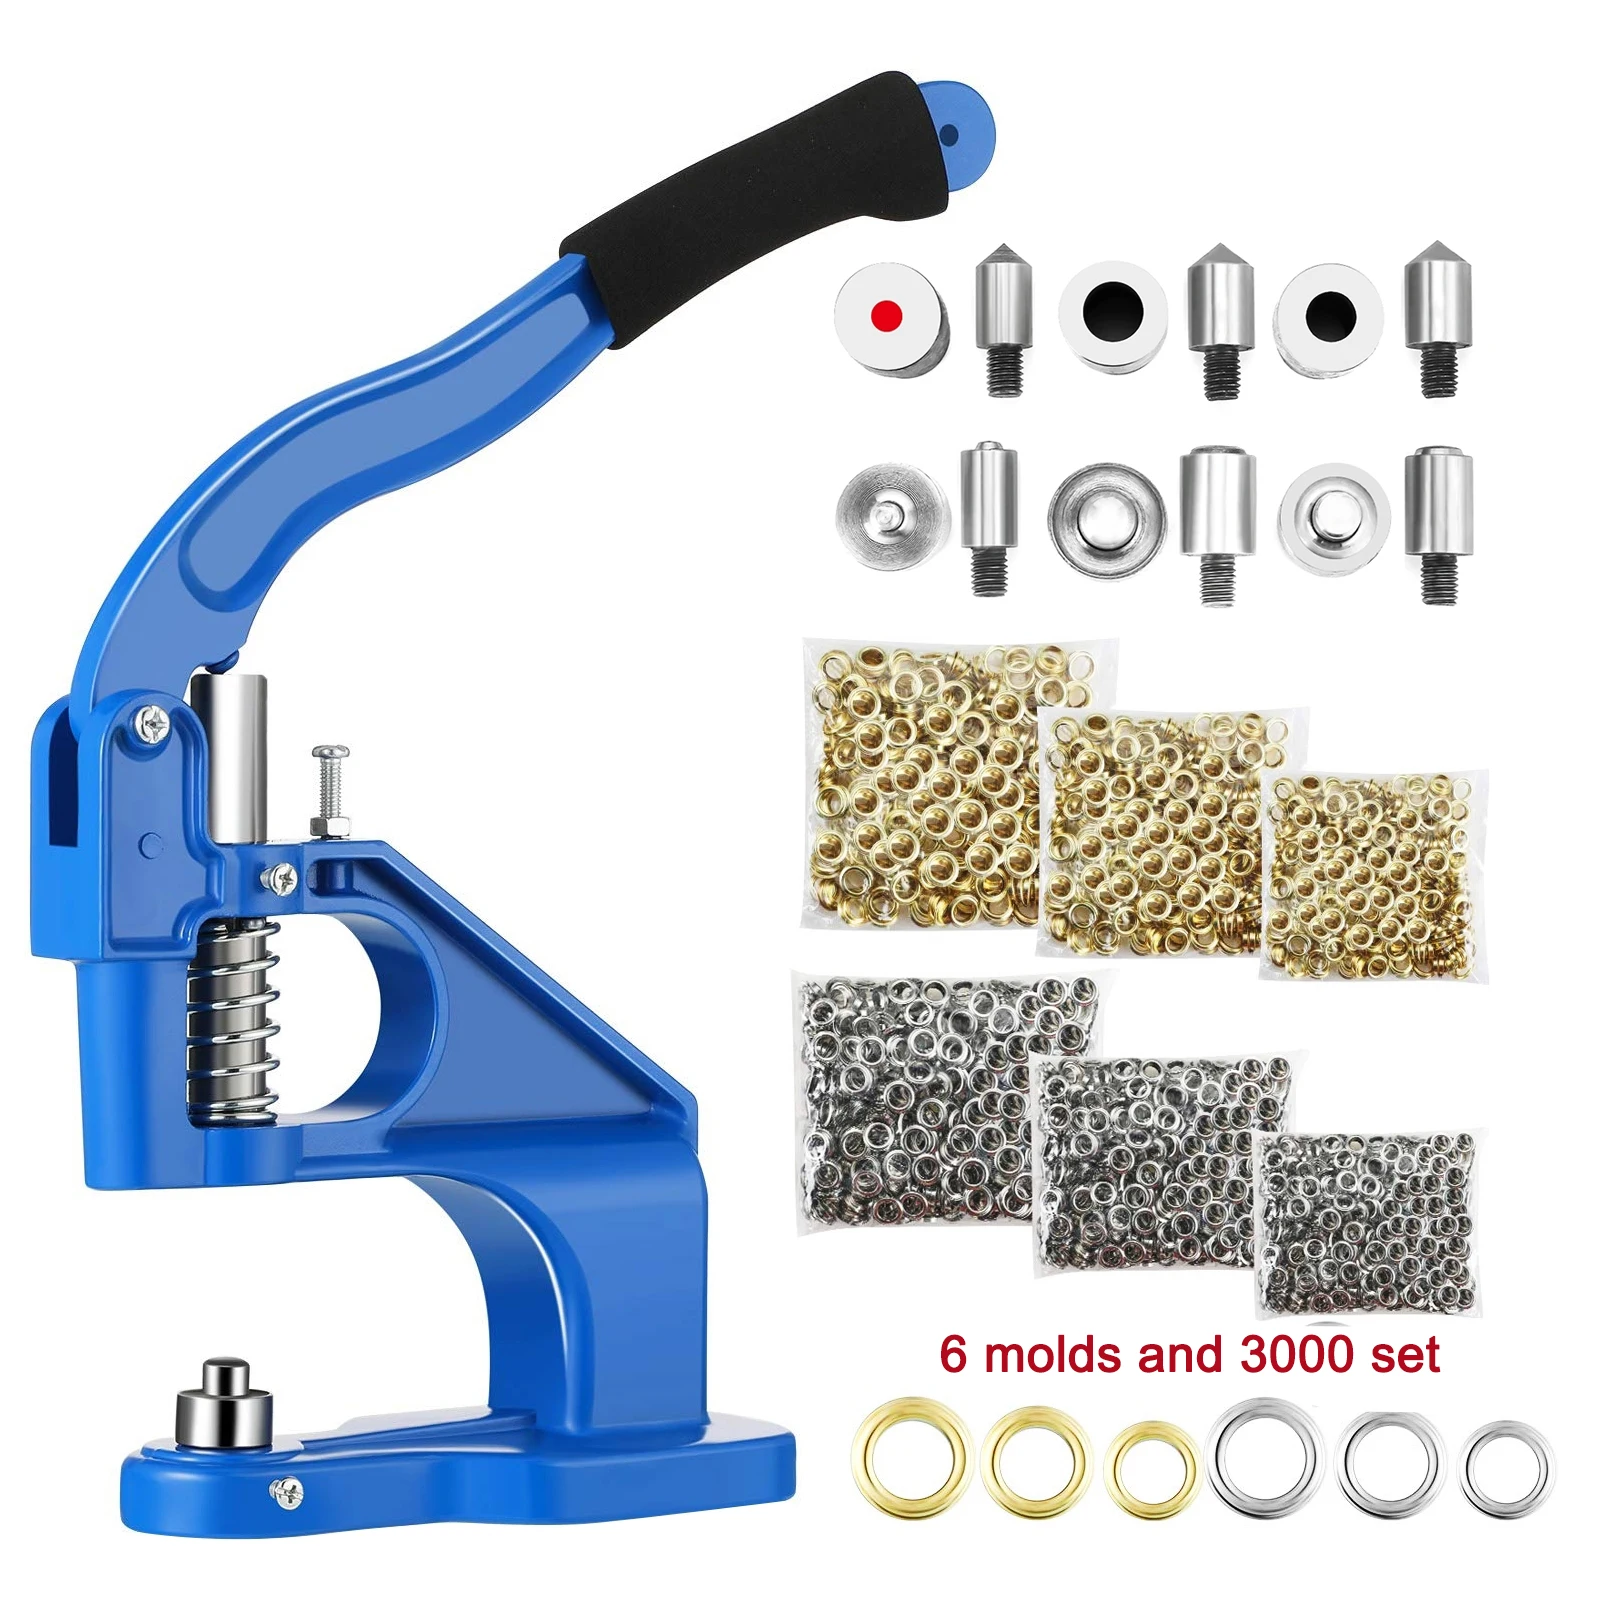 3 Dies Grommet Eyelet Hole Punch Machine Hand Press Tool 1500 Eyelets US Ship for sale online 